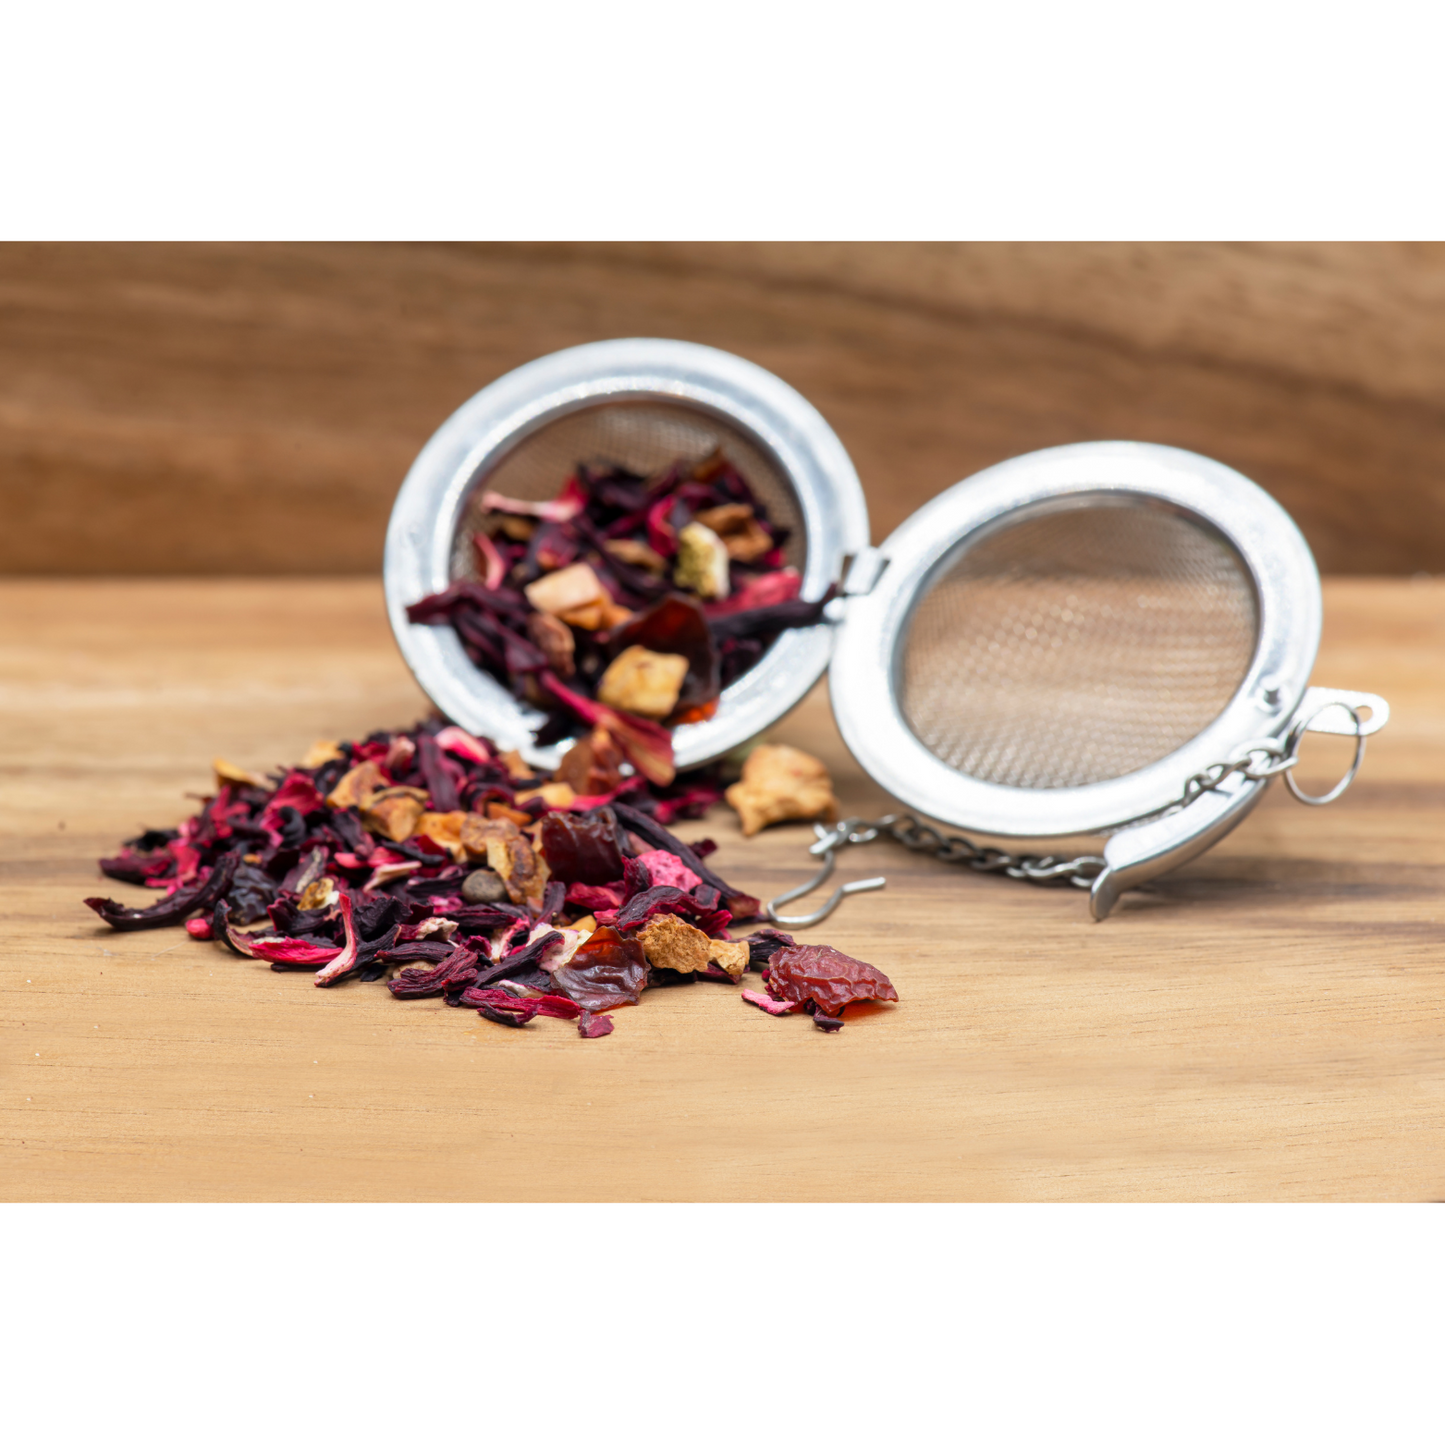 Witchy Pooh's Tea Infuser Mesh Ball for Brewing Loose Leaf Tea 1.5inch with FREE Wooden Spoon!